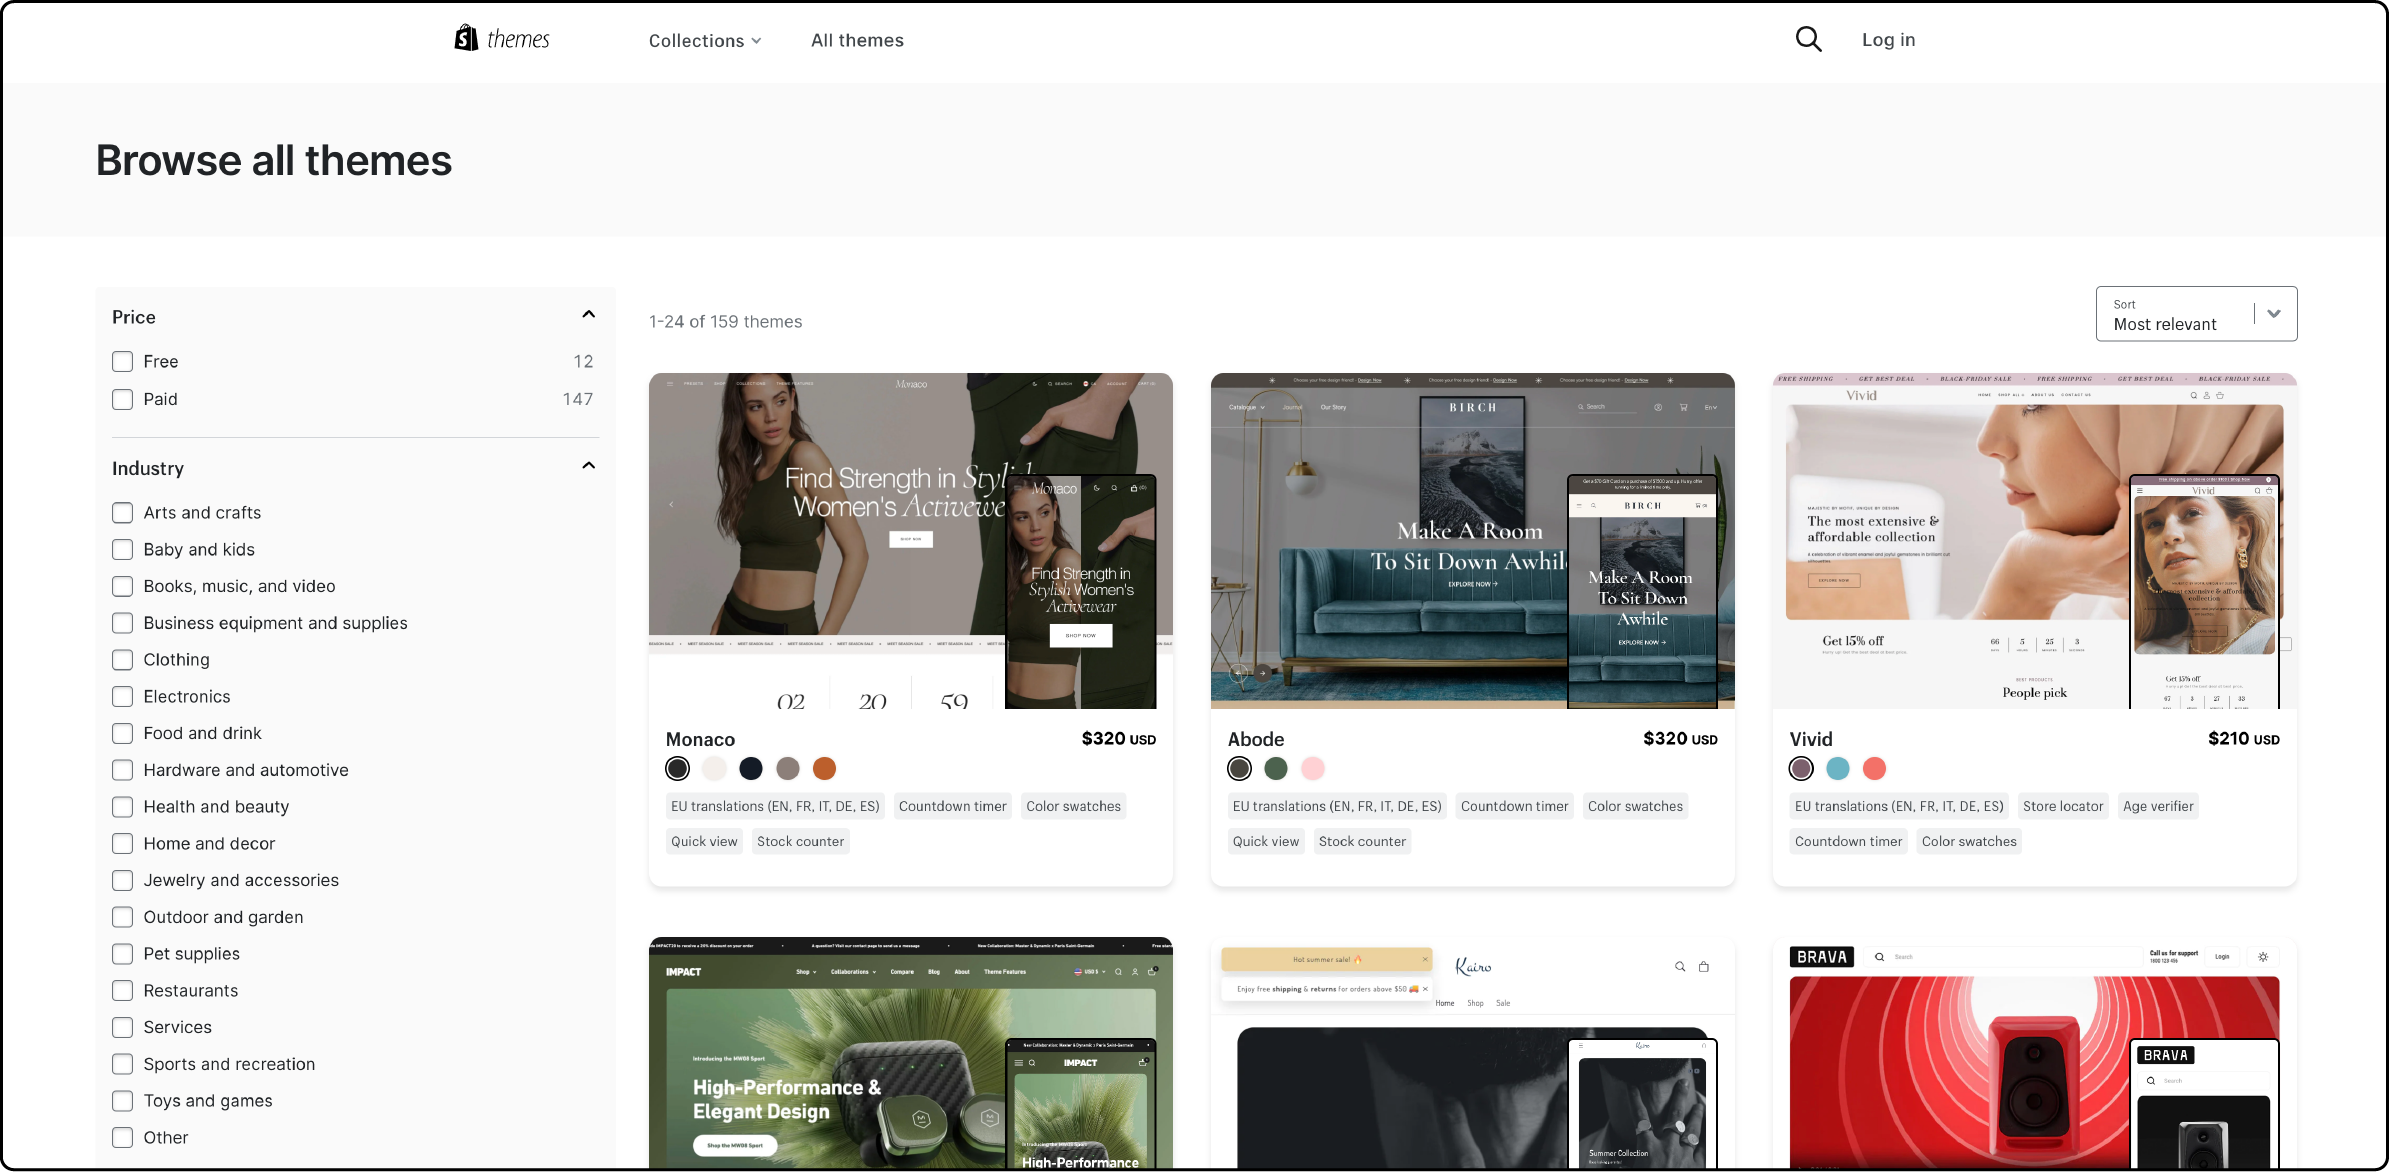 Collection of built-in themes in Shopify Plus